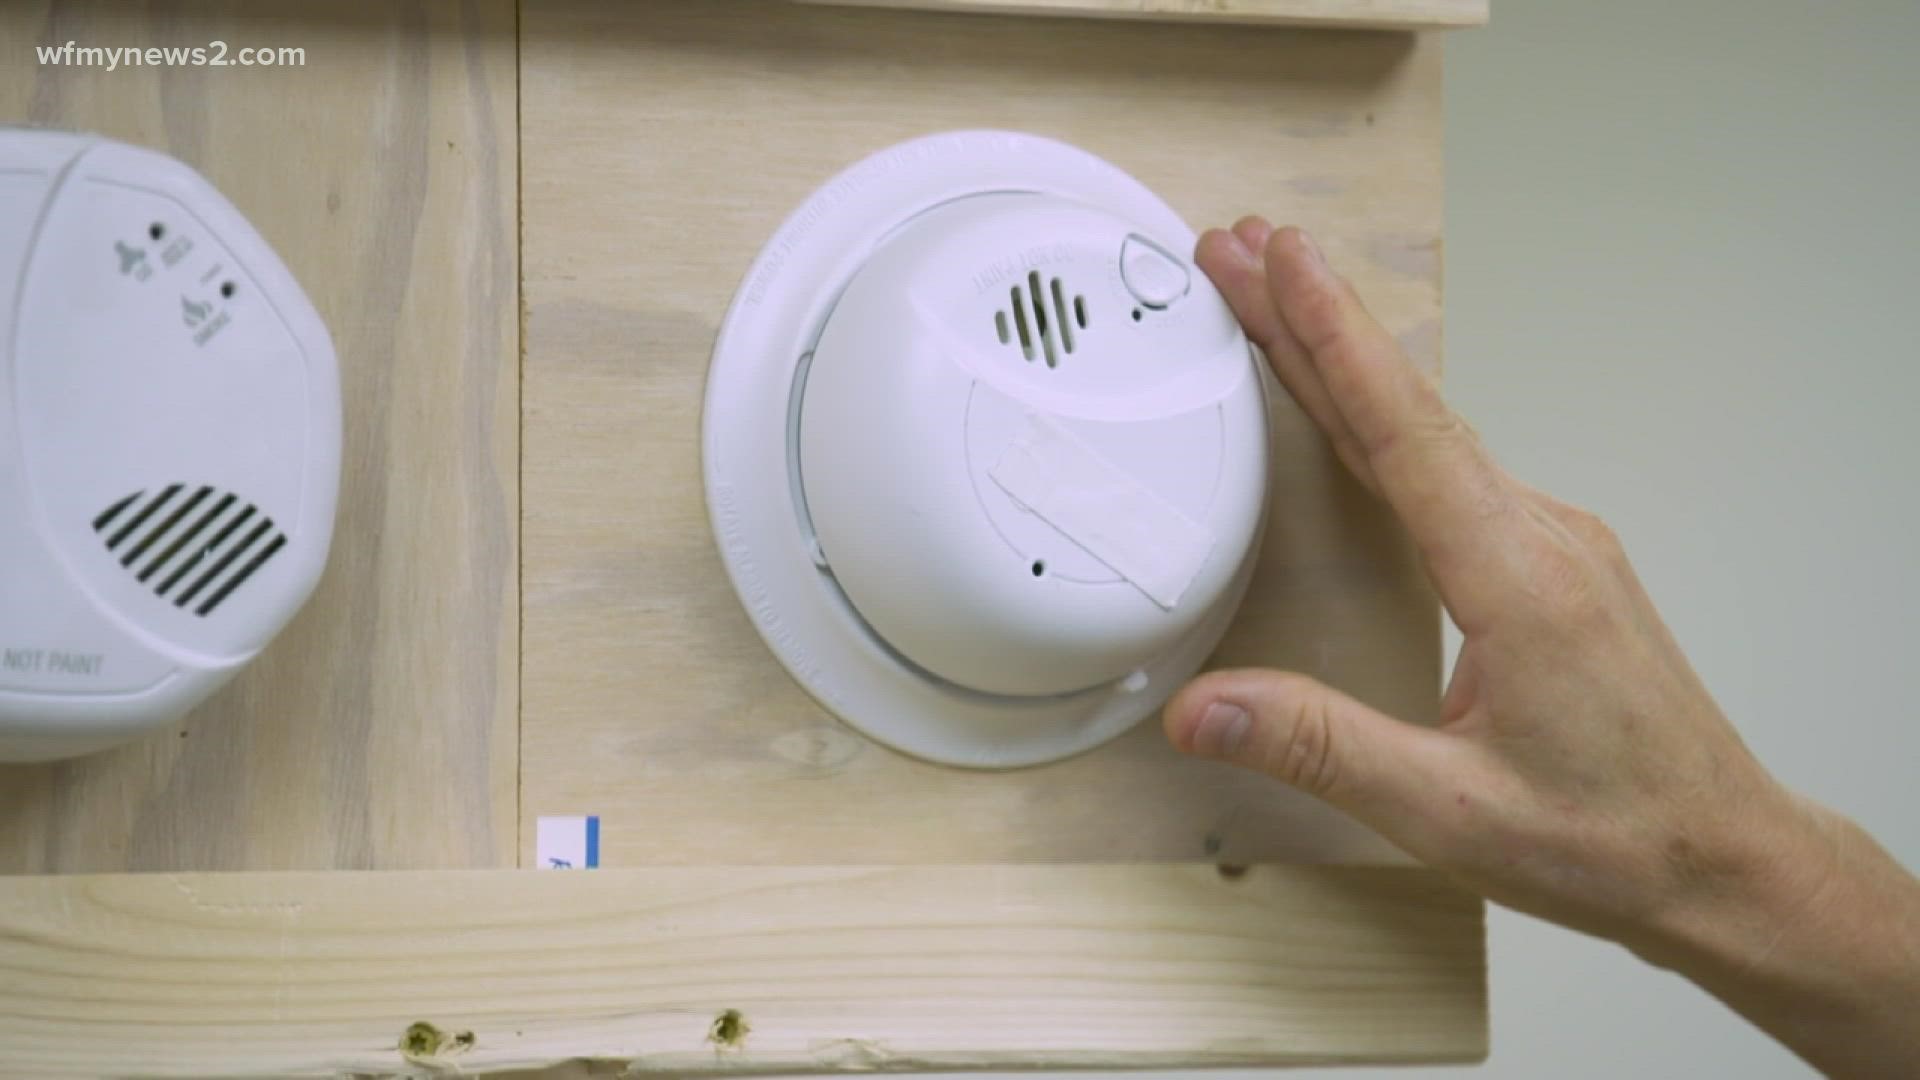 The battery in your smoke alarm should be replaced every six months, and replace the alarm itself every decade.